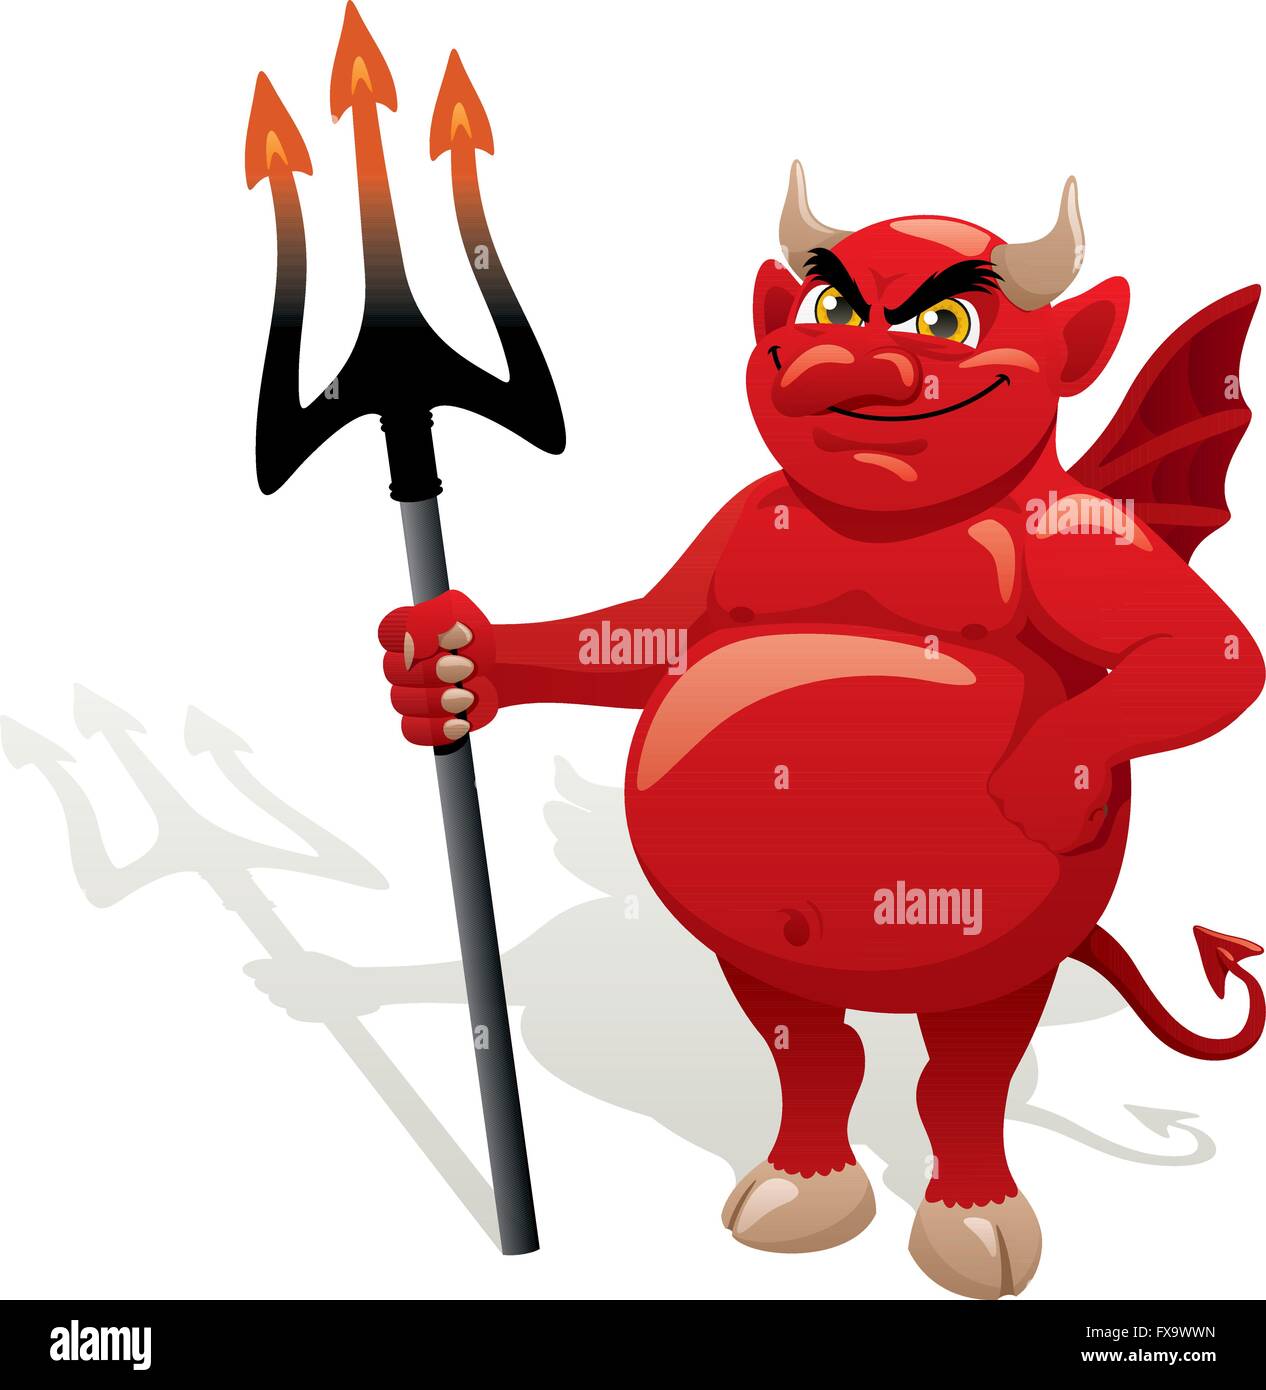 Cartoon Devil. No transparency used. Basic (linear) gradients used. Stock Vector